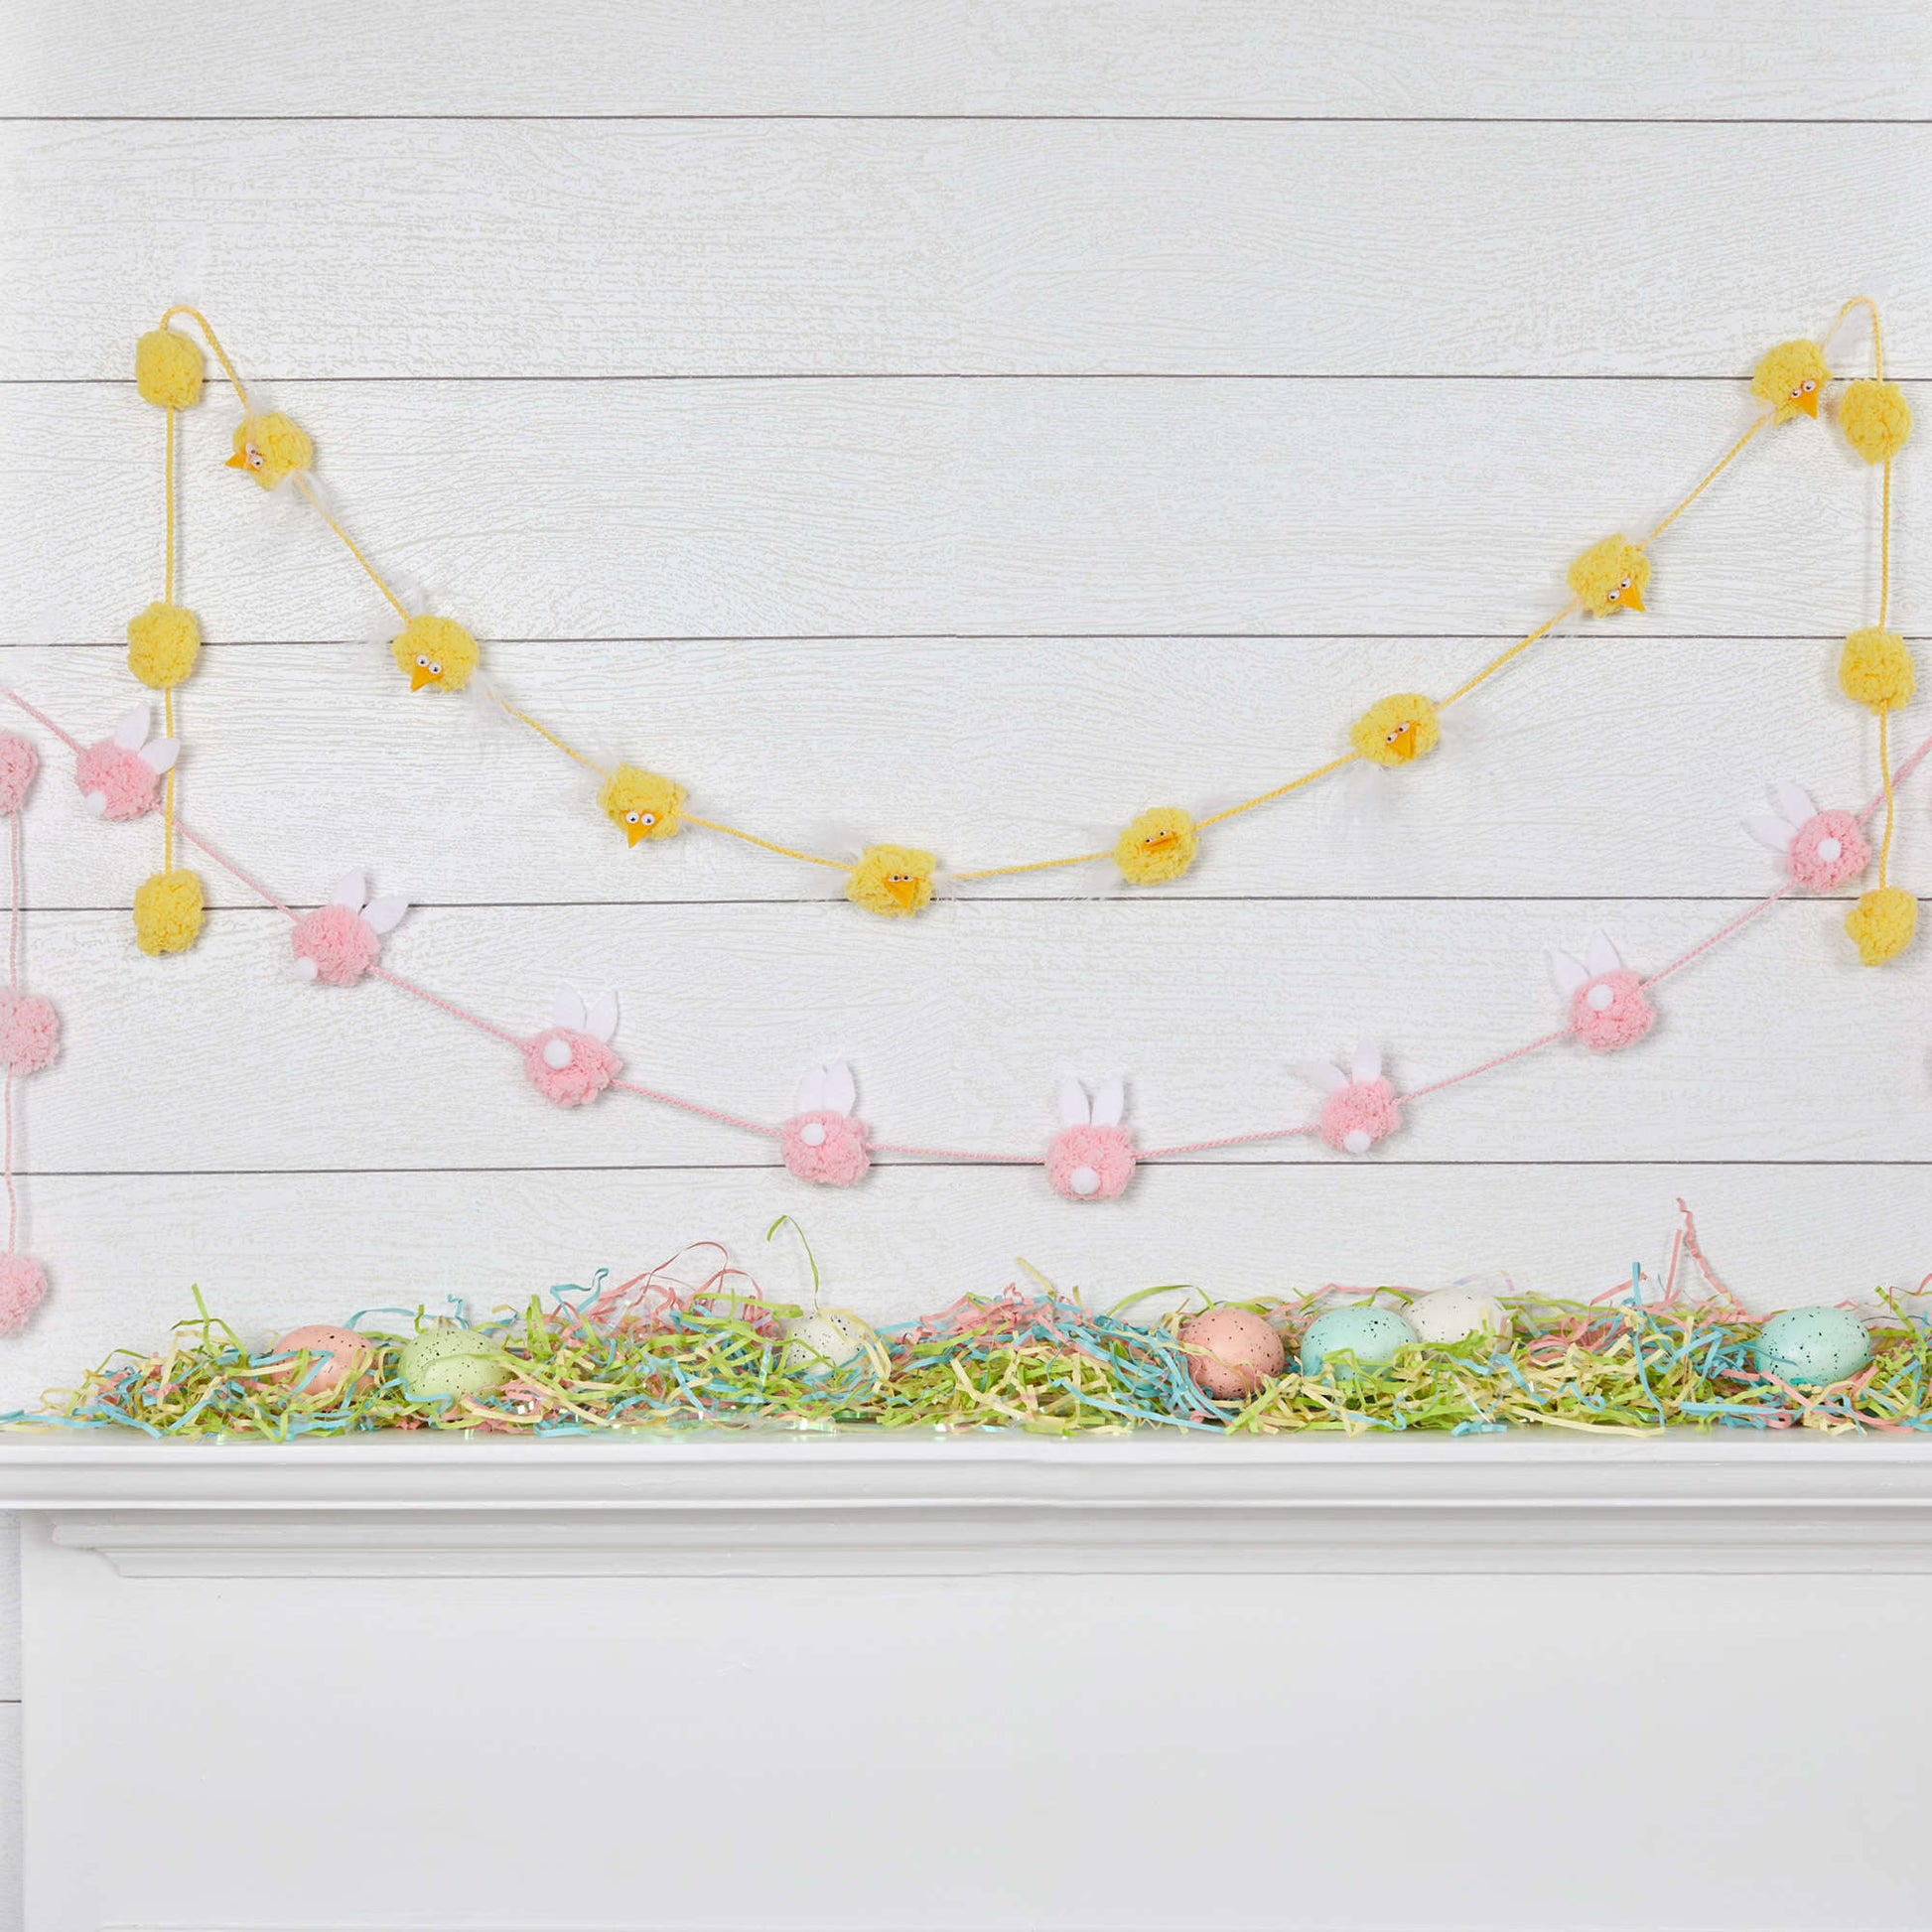 Free Red Heart Craft Bunny And Chick Party Decorations Pattern